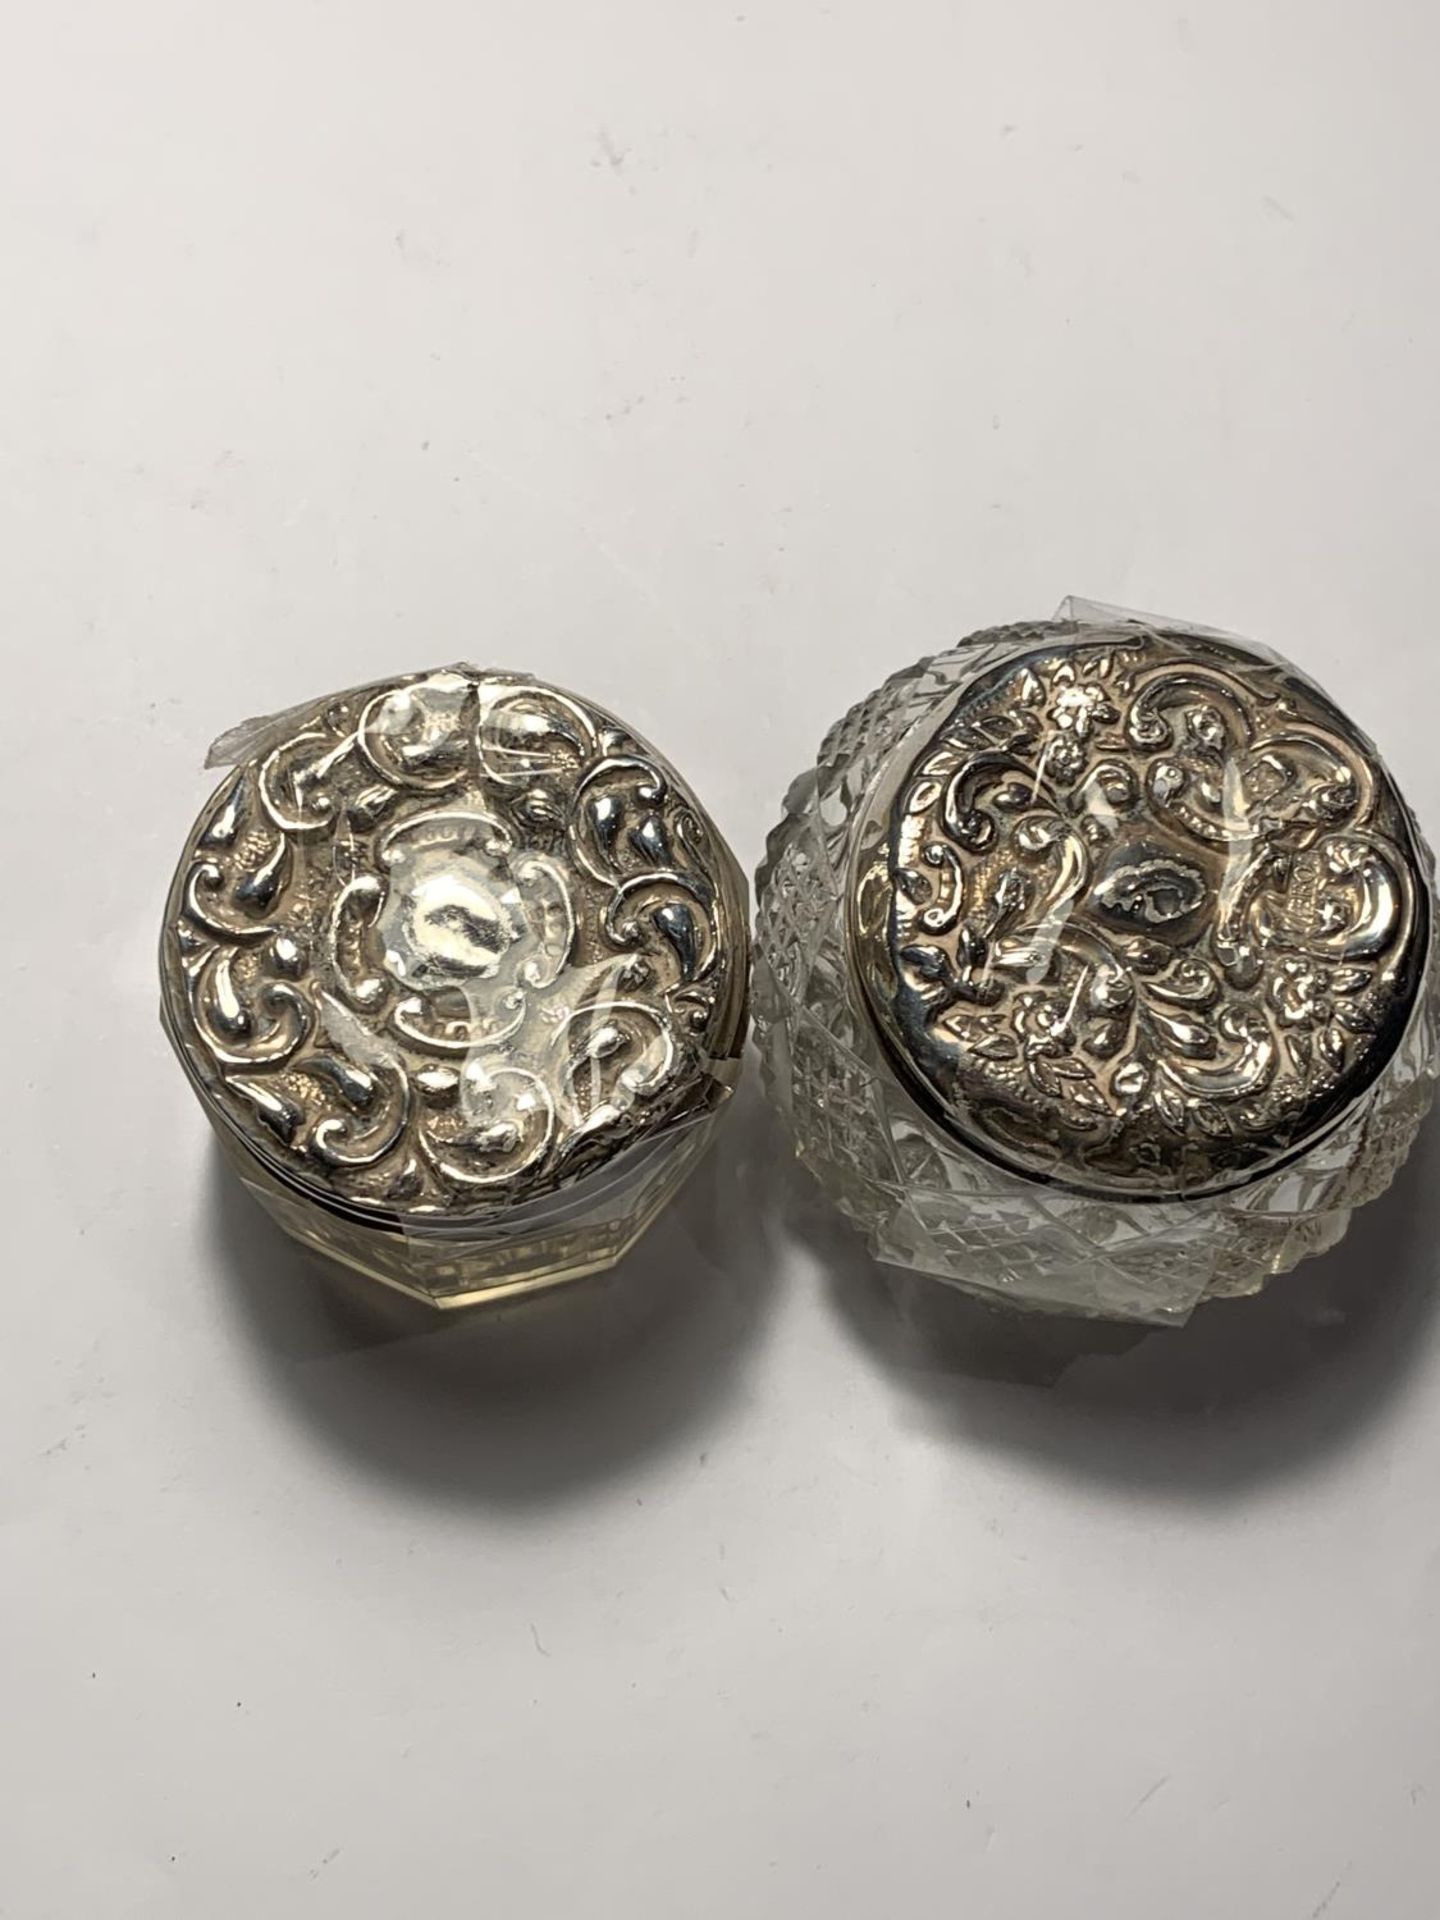 TWO GLASS JARS WITH ORNATE SILVER TOPS - Image 3 of 3